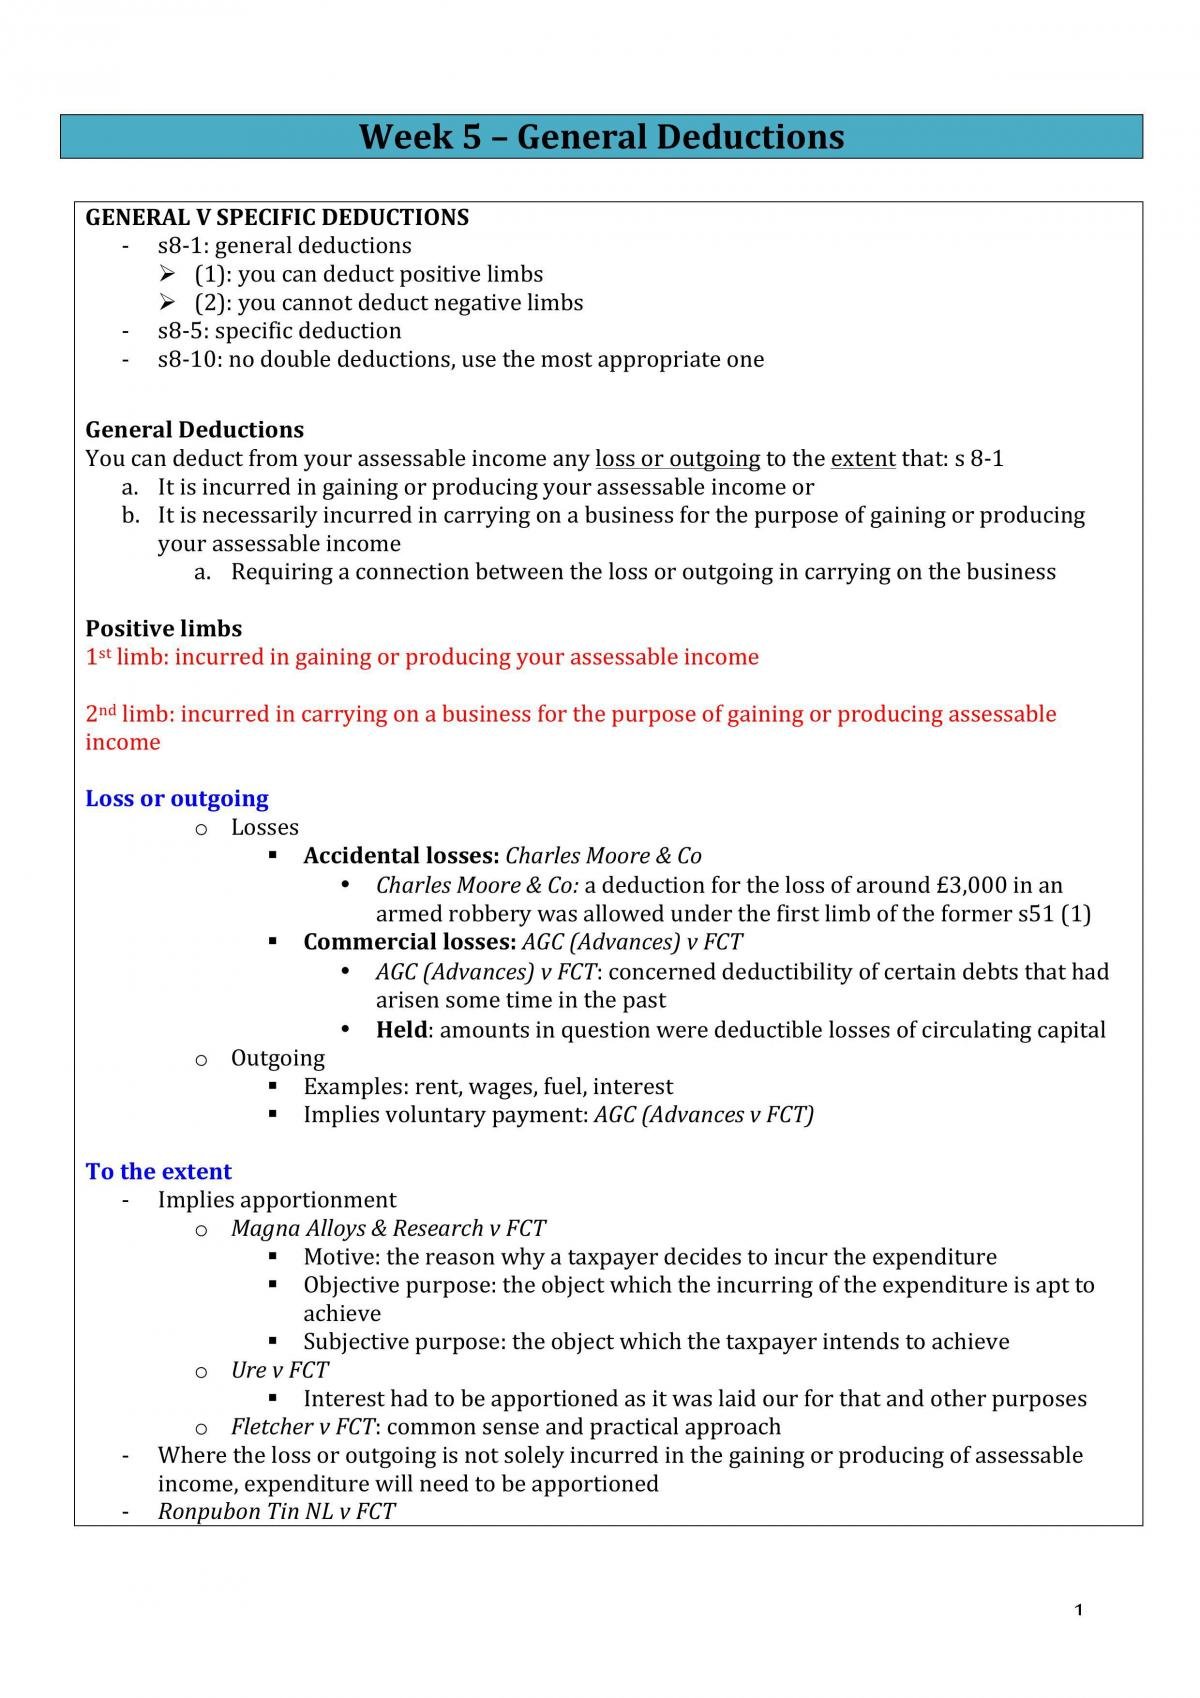 Final Exam Notes from Week 5 - Page 1